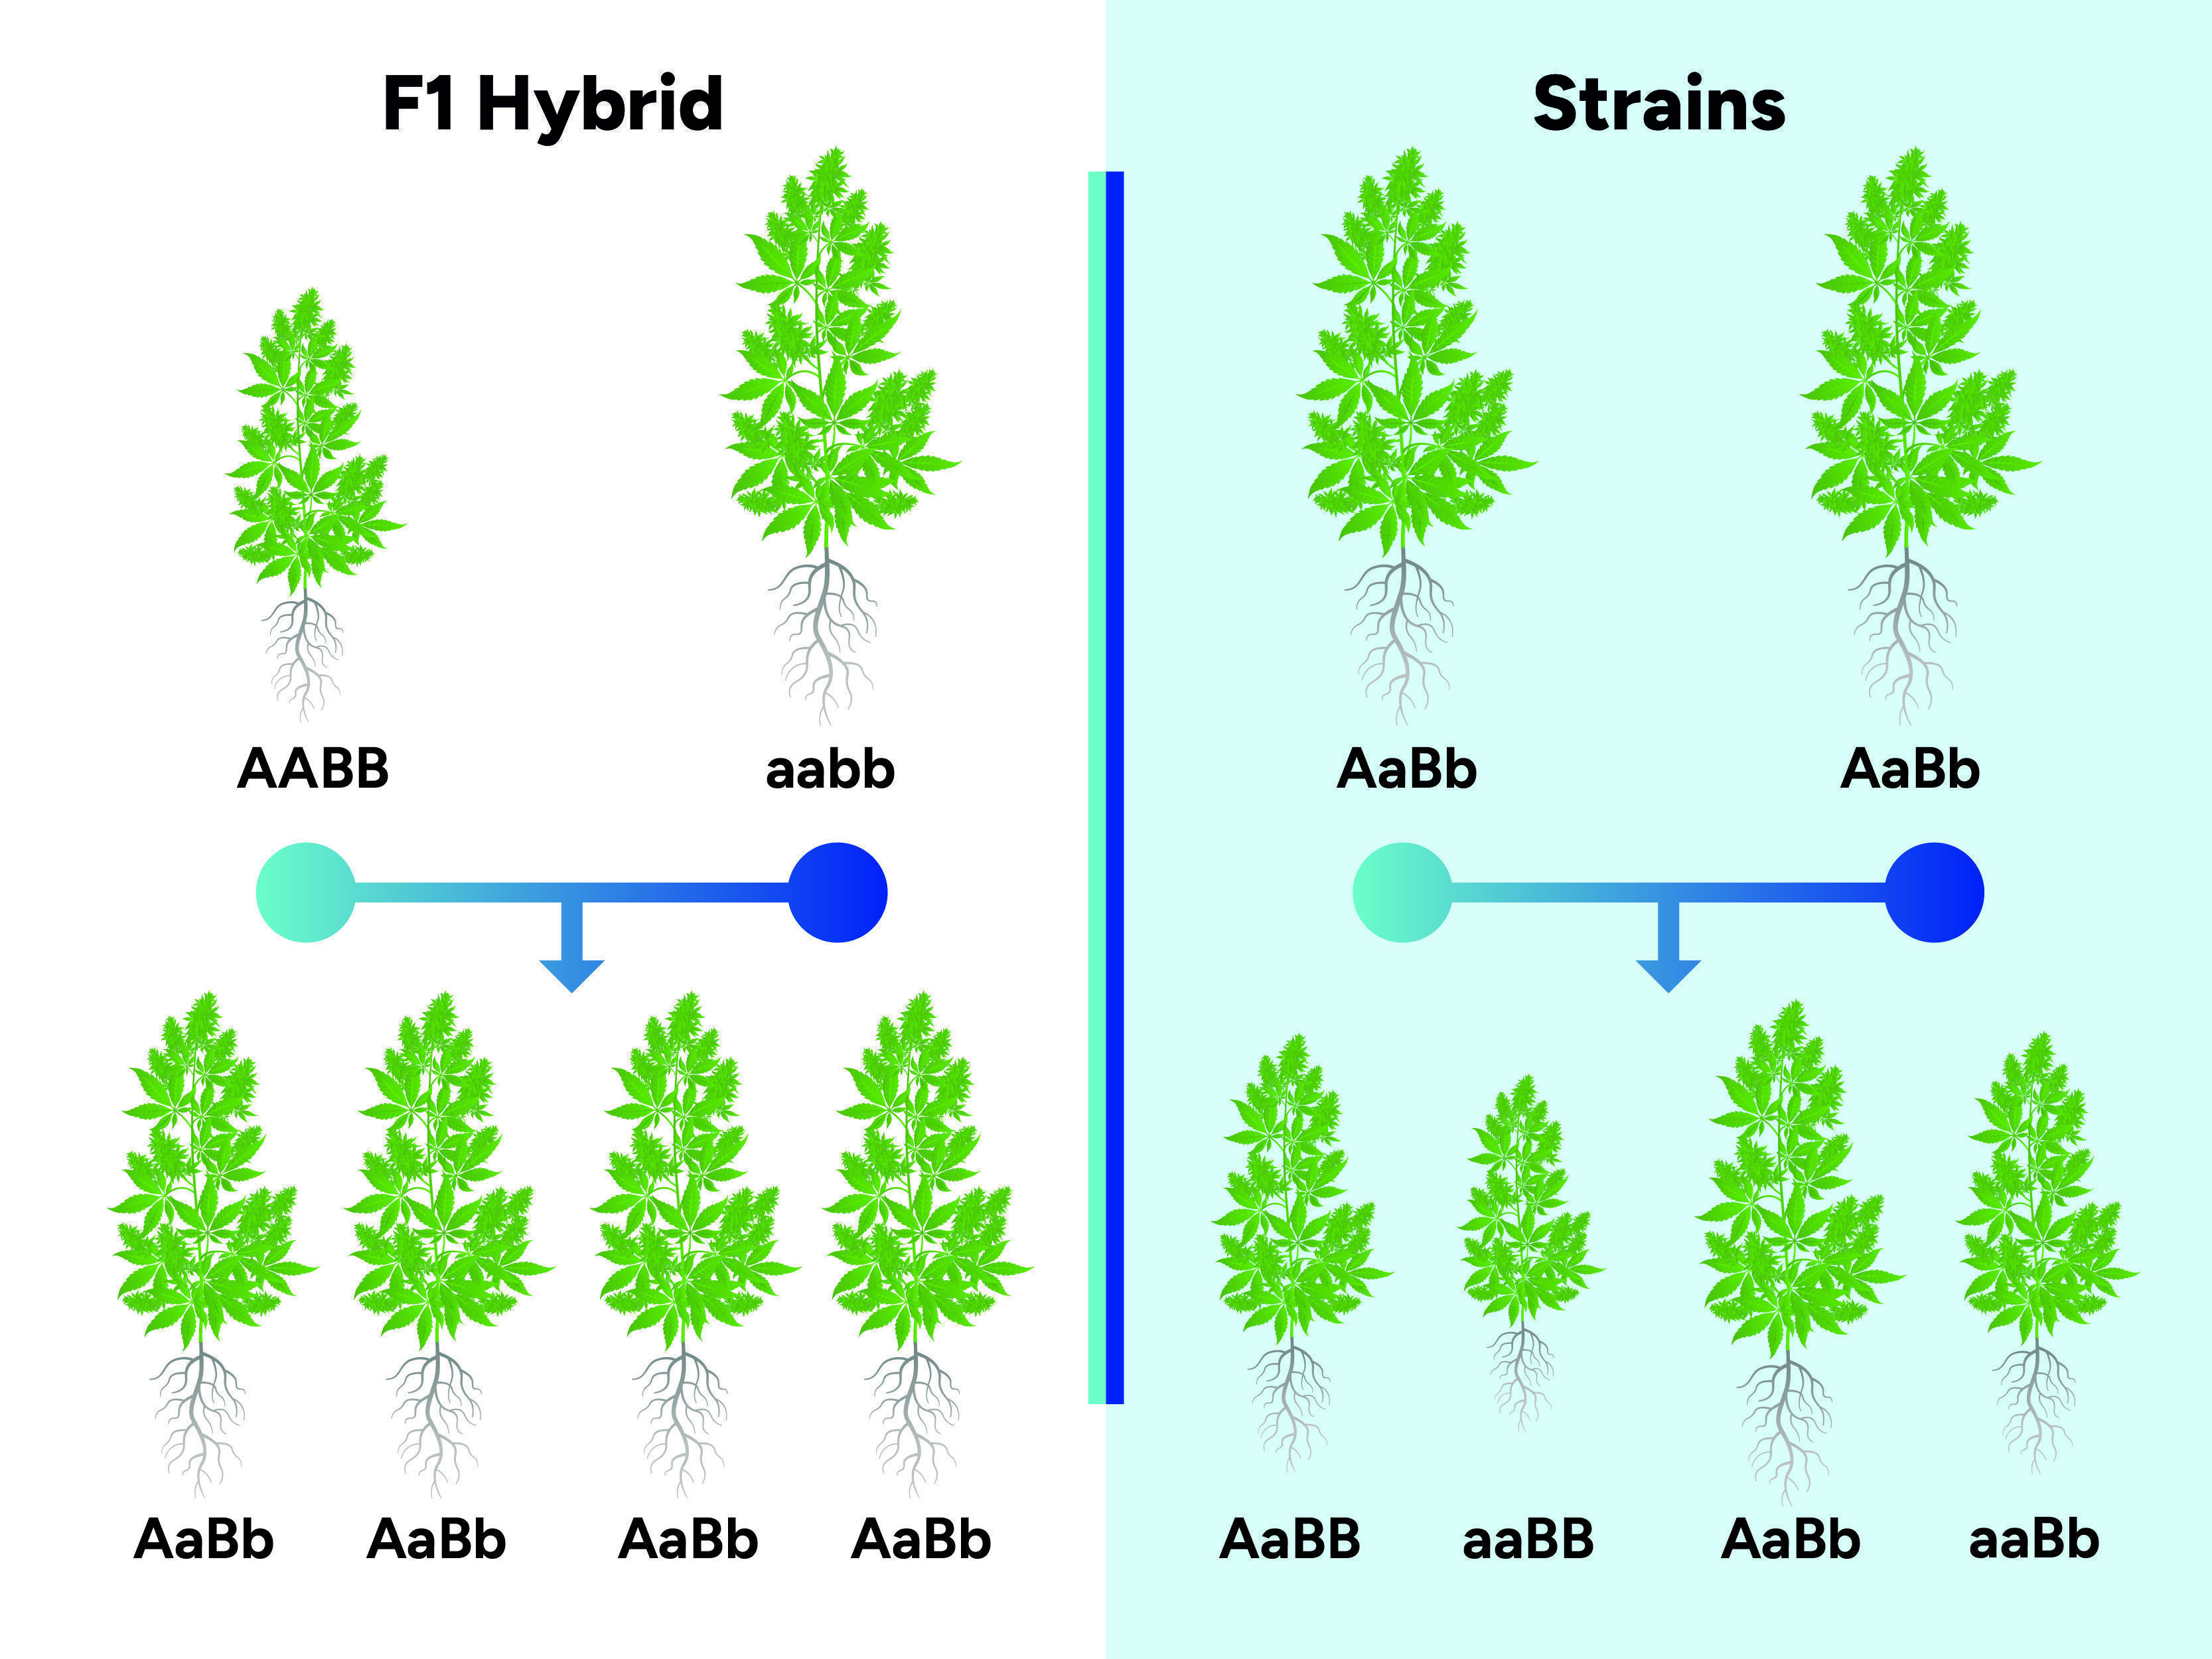 What Are F1 Cannabis Hybrids?